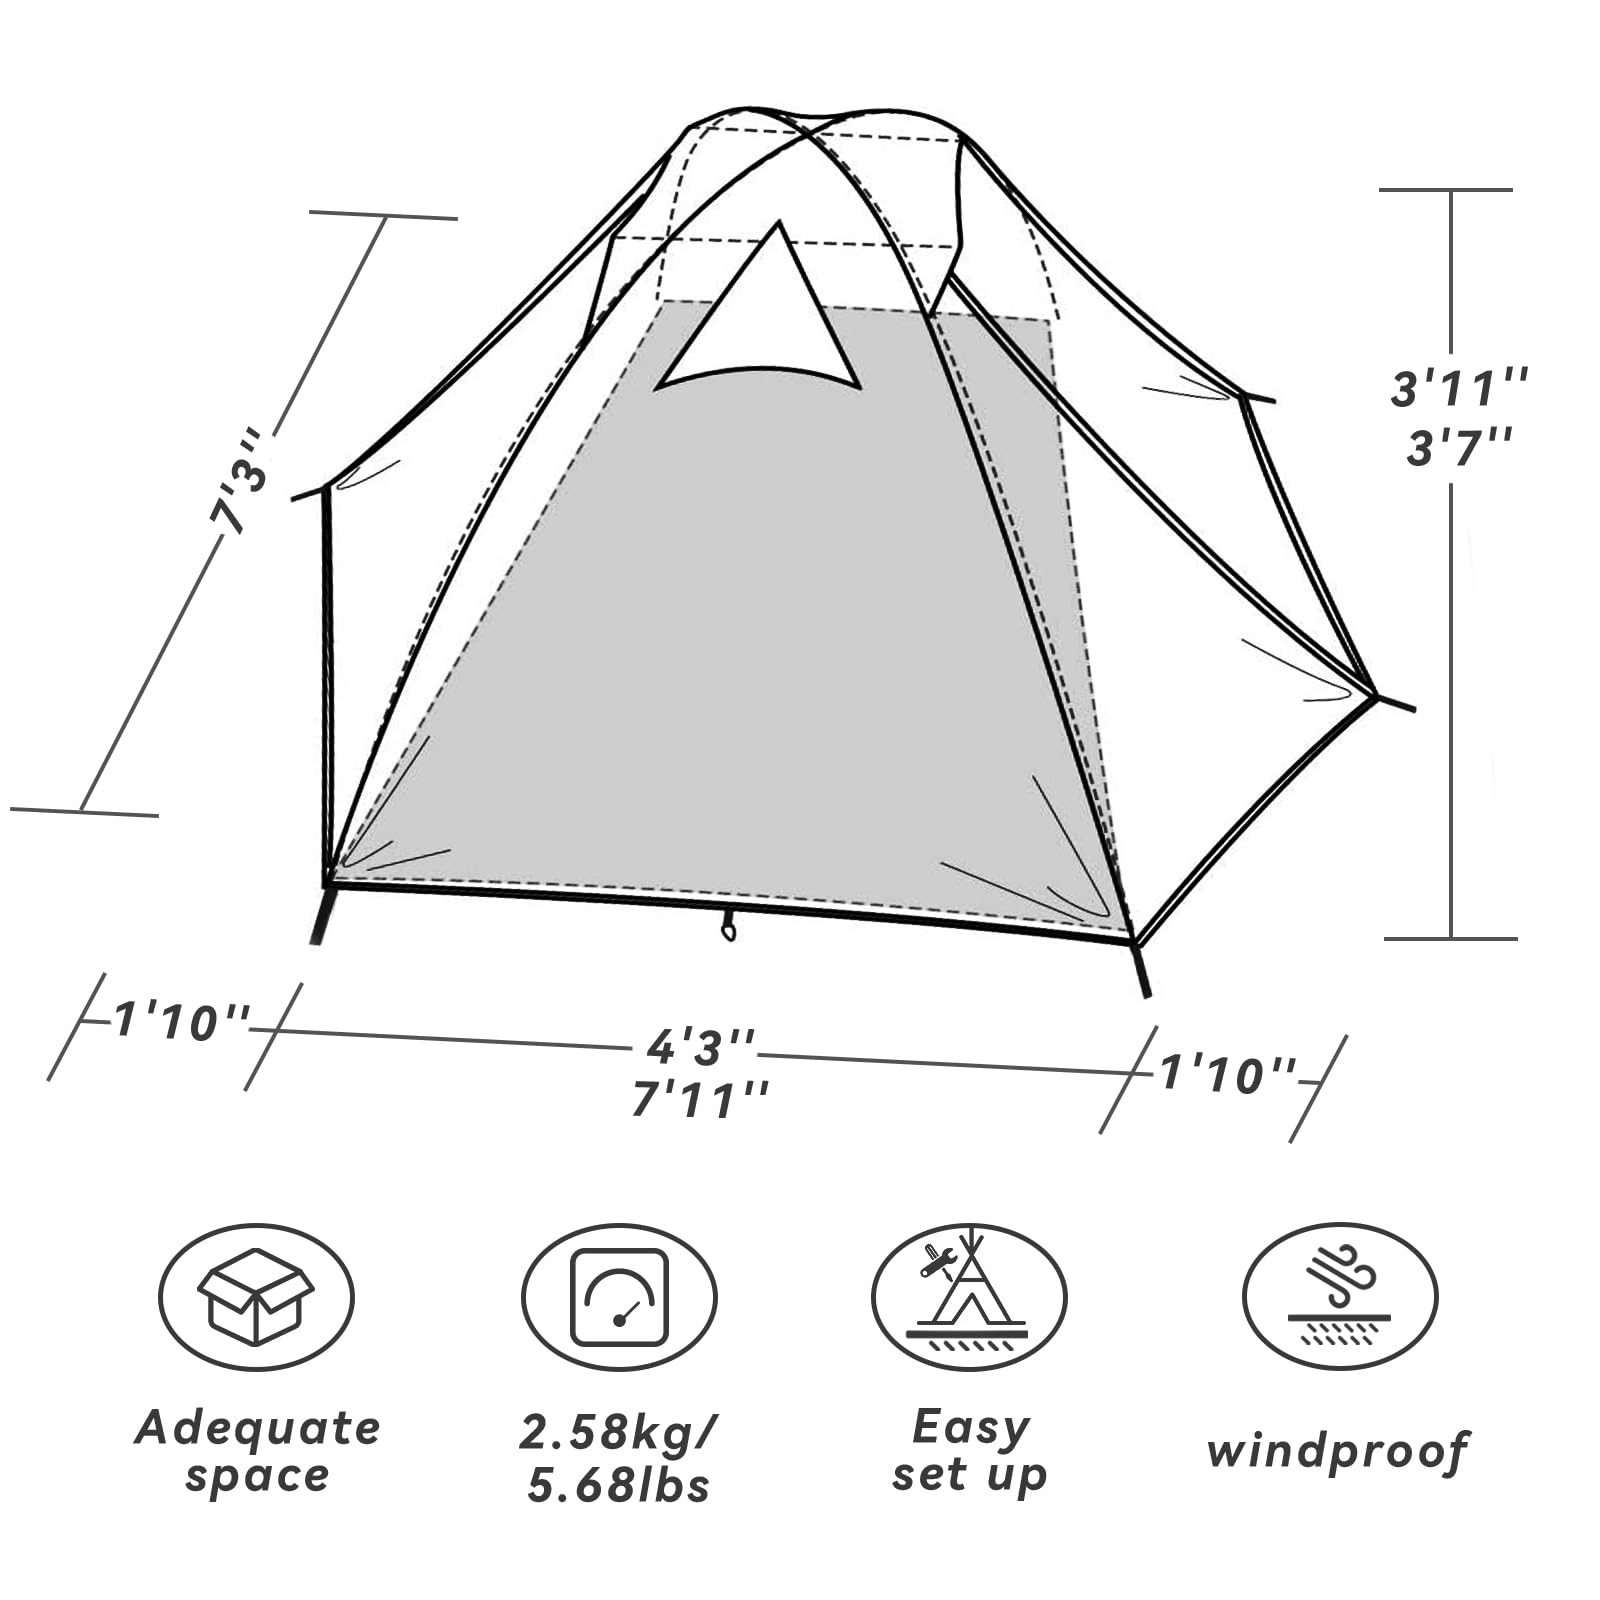 Forceatt Camping Tent-2 Person Tent, Waterproof & Windproof. Lightweight Backpacking Tent, Easy Setup, Suitable for Outdoor and